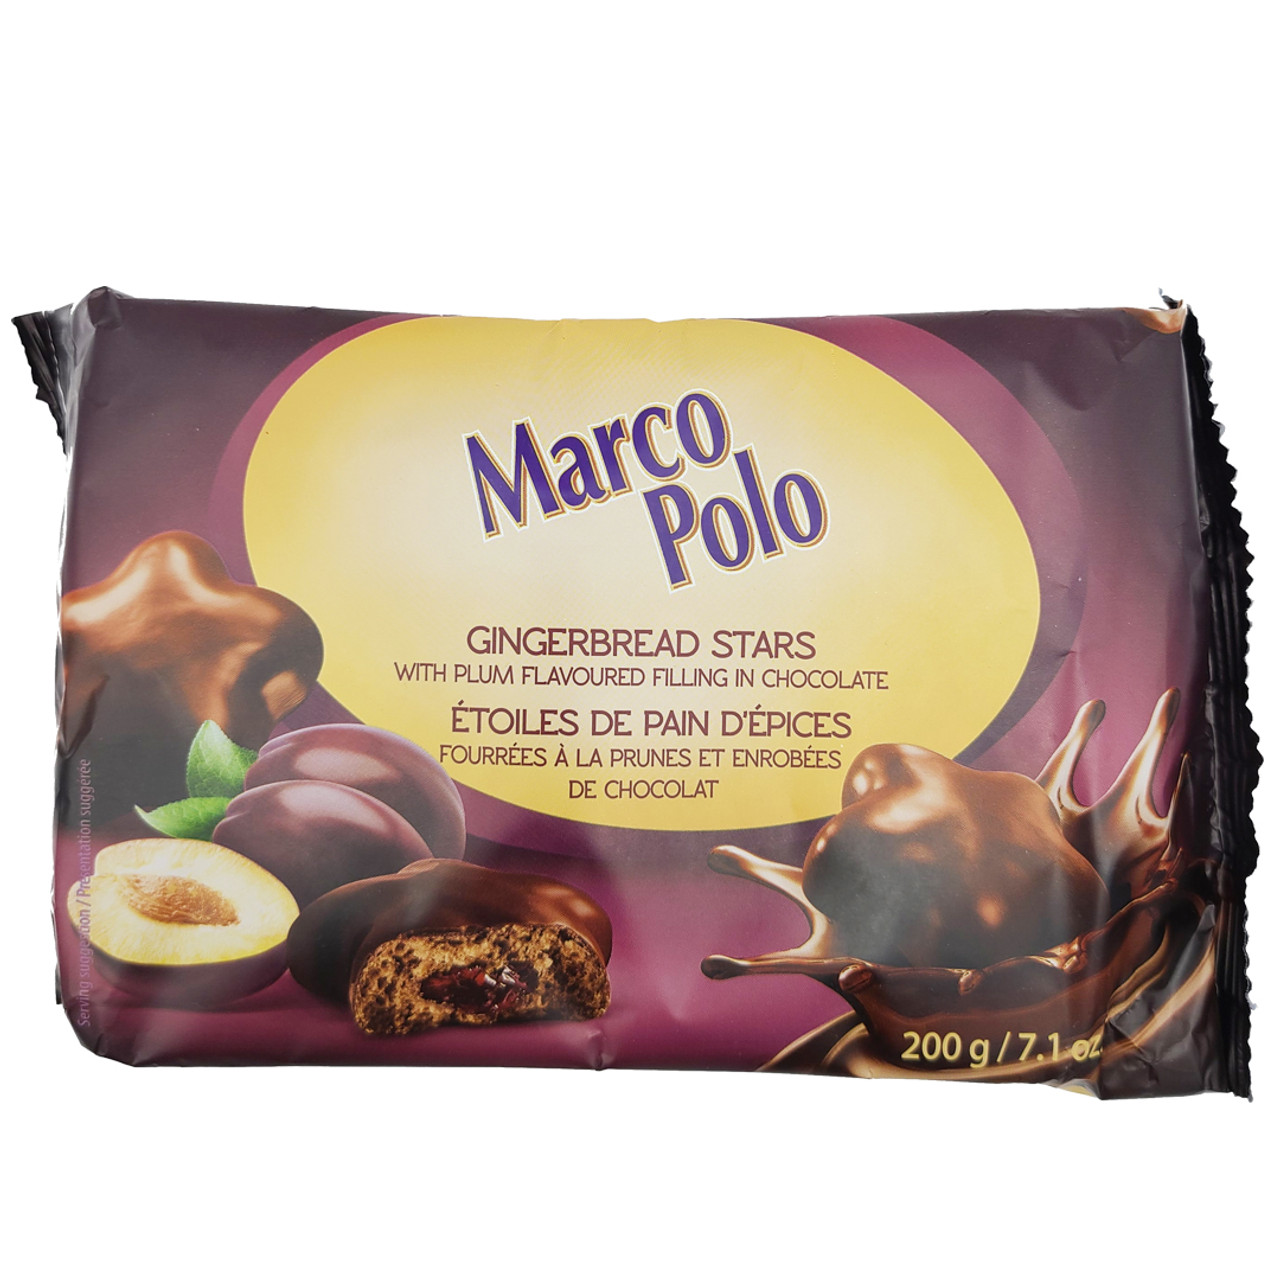 Marco Polo Chocolate Covered Gingerbread Plum Stars, 200g